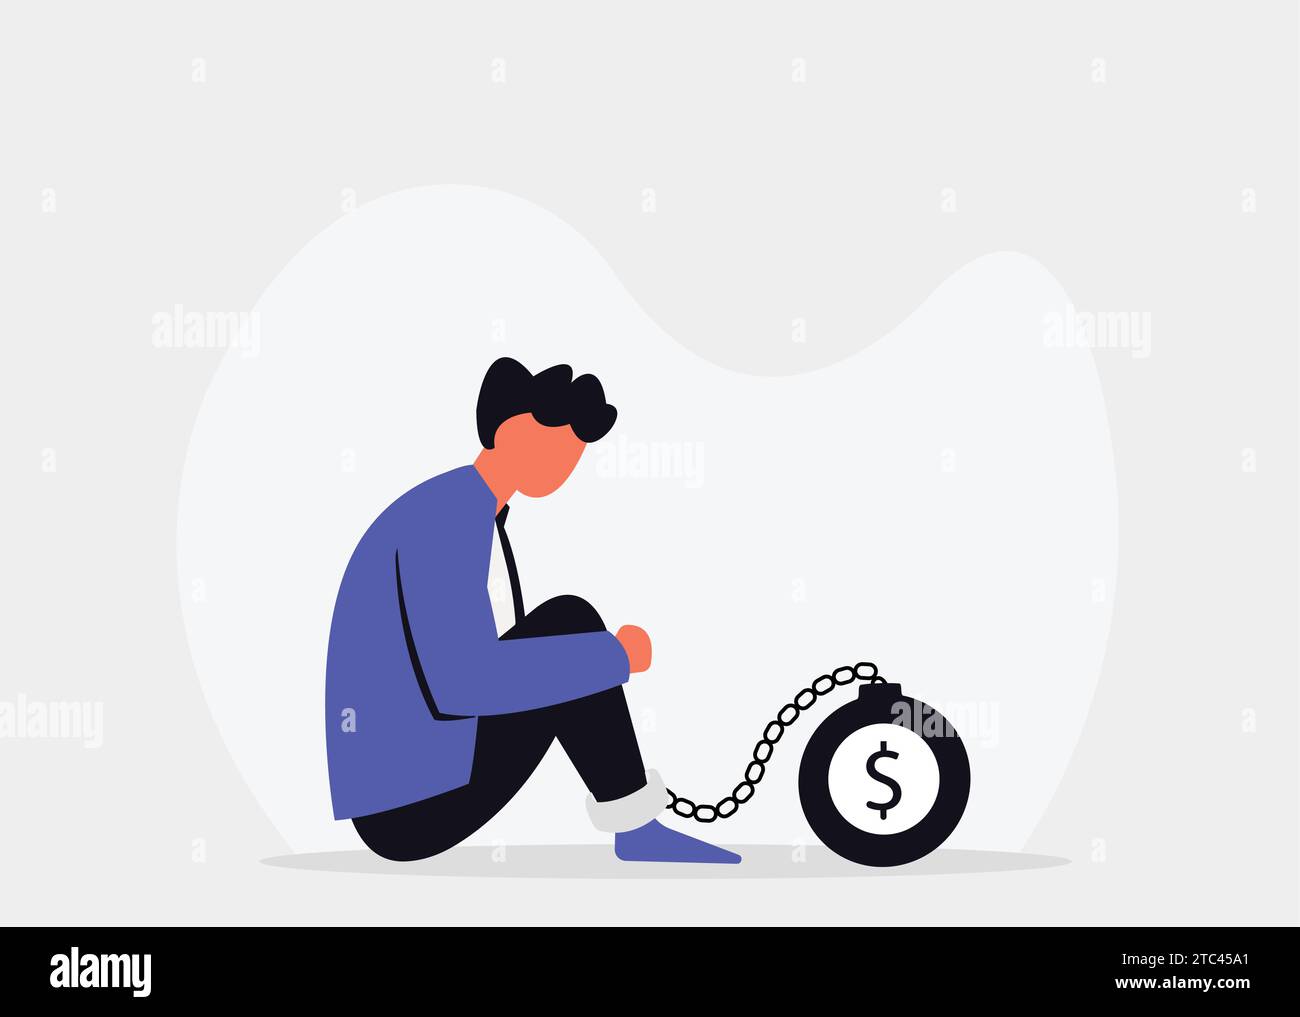 Man sitting with loan, unable to pay debt and worried illustration Stock Vector